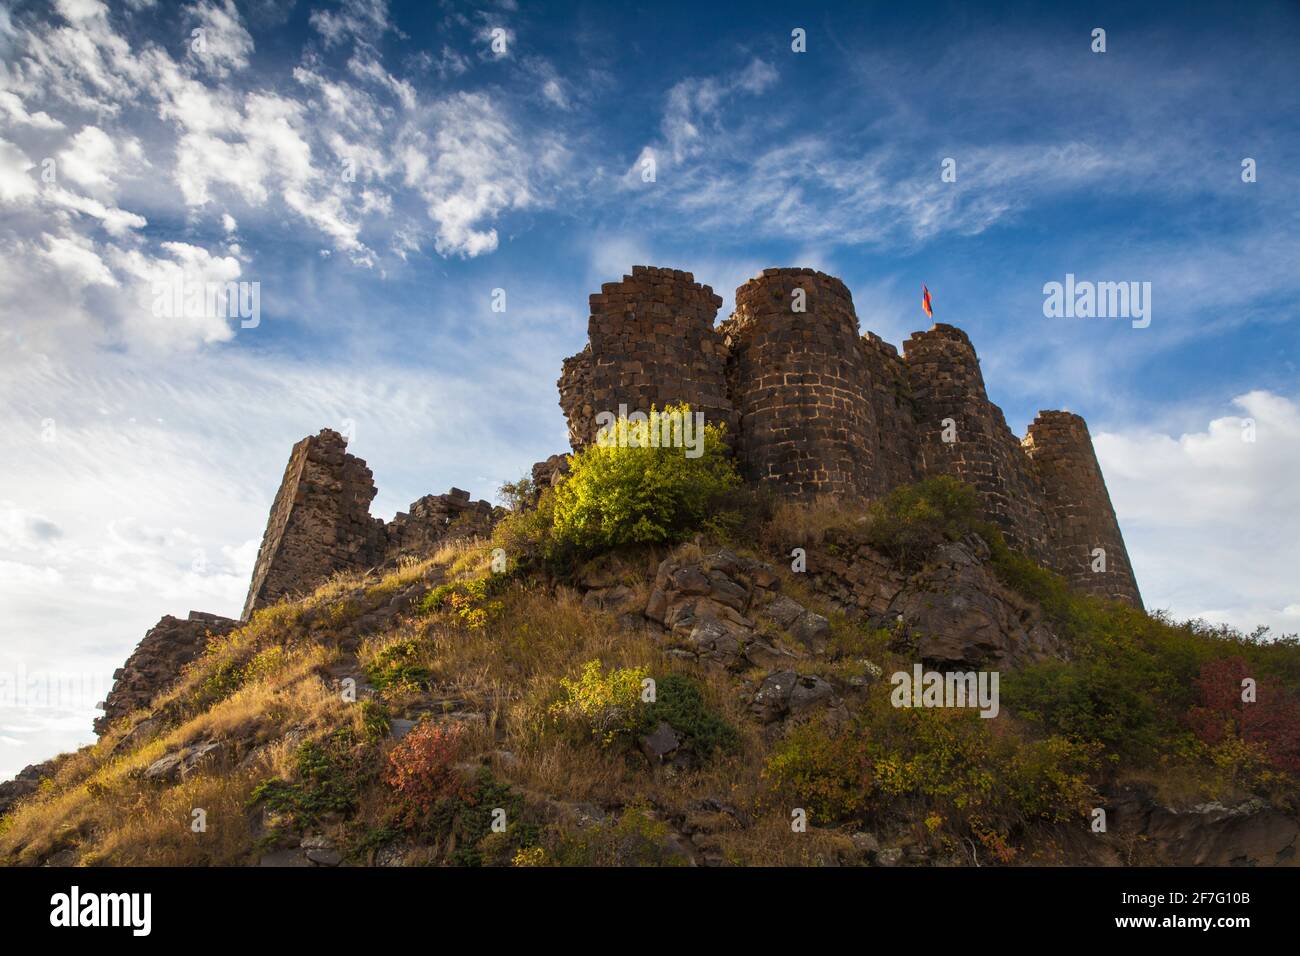 Armenia, Aragatsotn, Yerevan, Amberd fortress located on the slopes of Mount Aragats Stock Photo